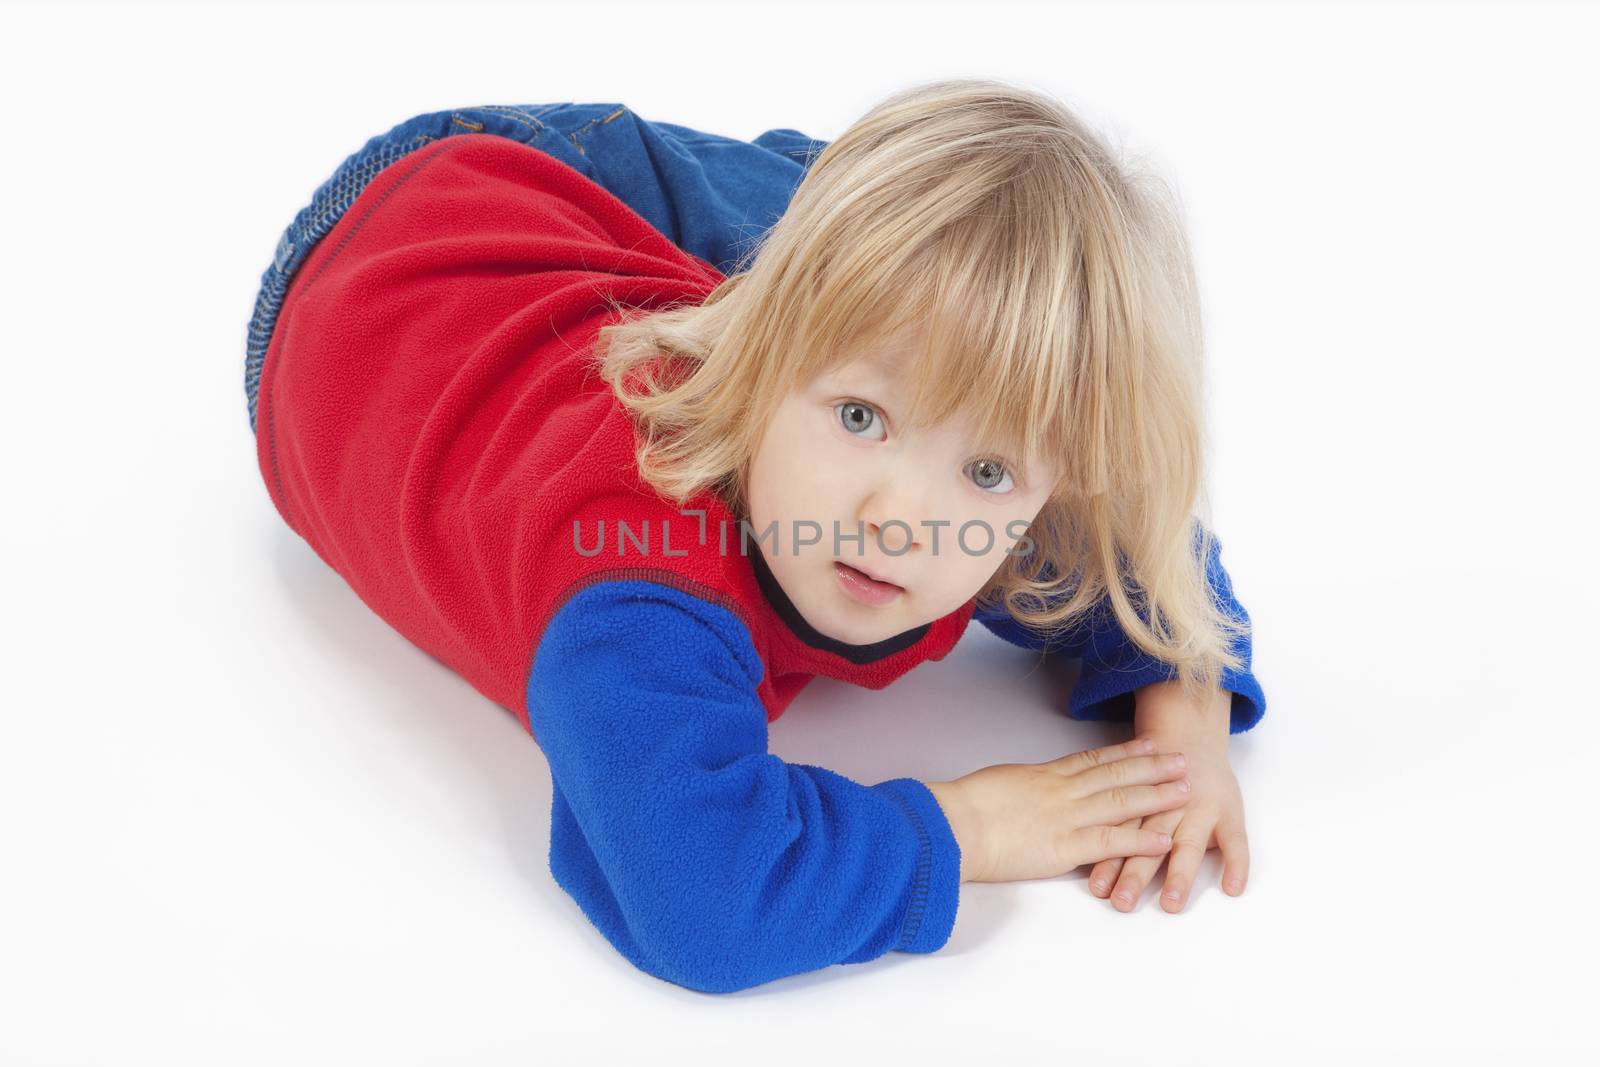 boy with long blond hair lying down, looking at camera